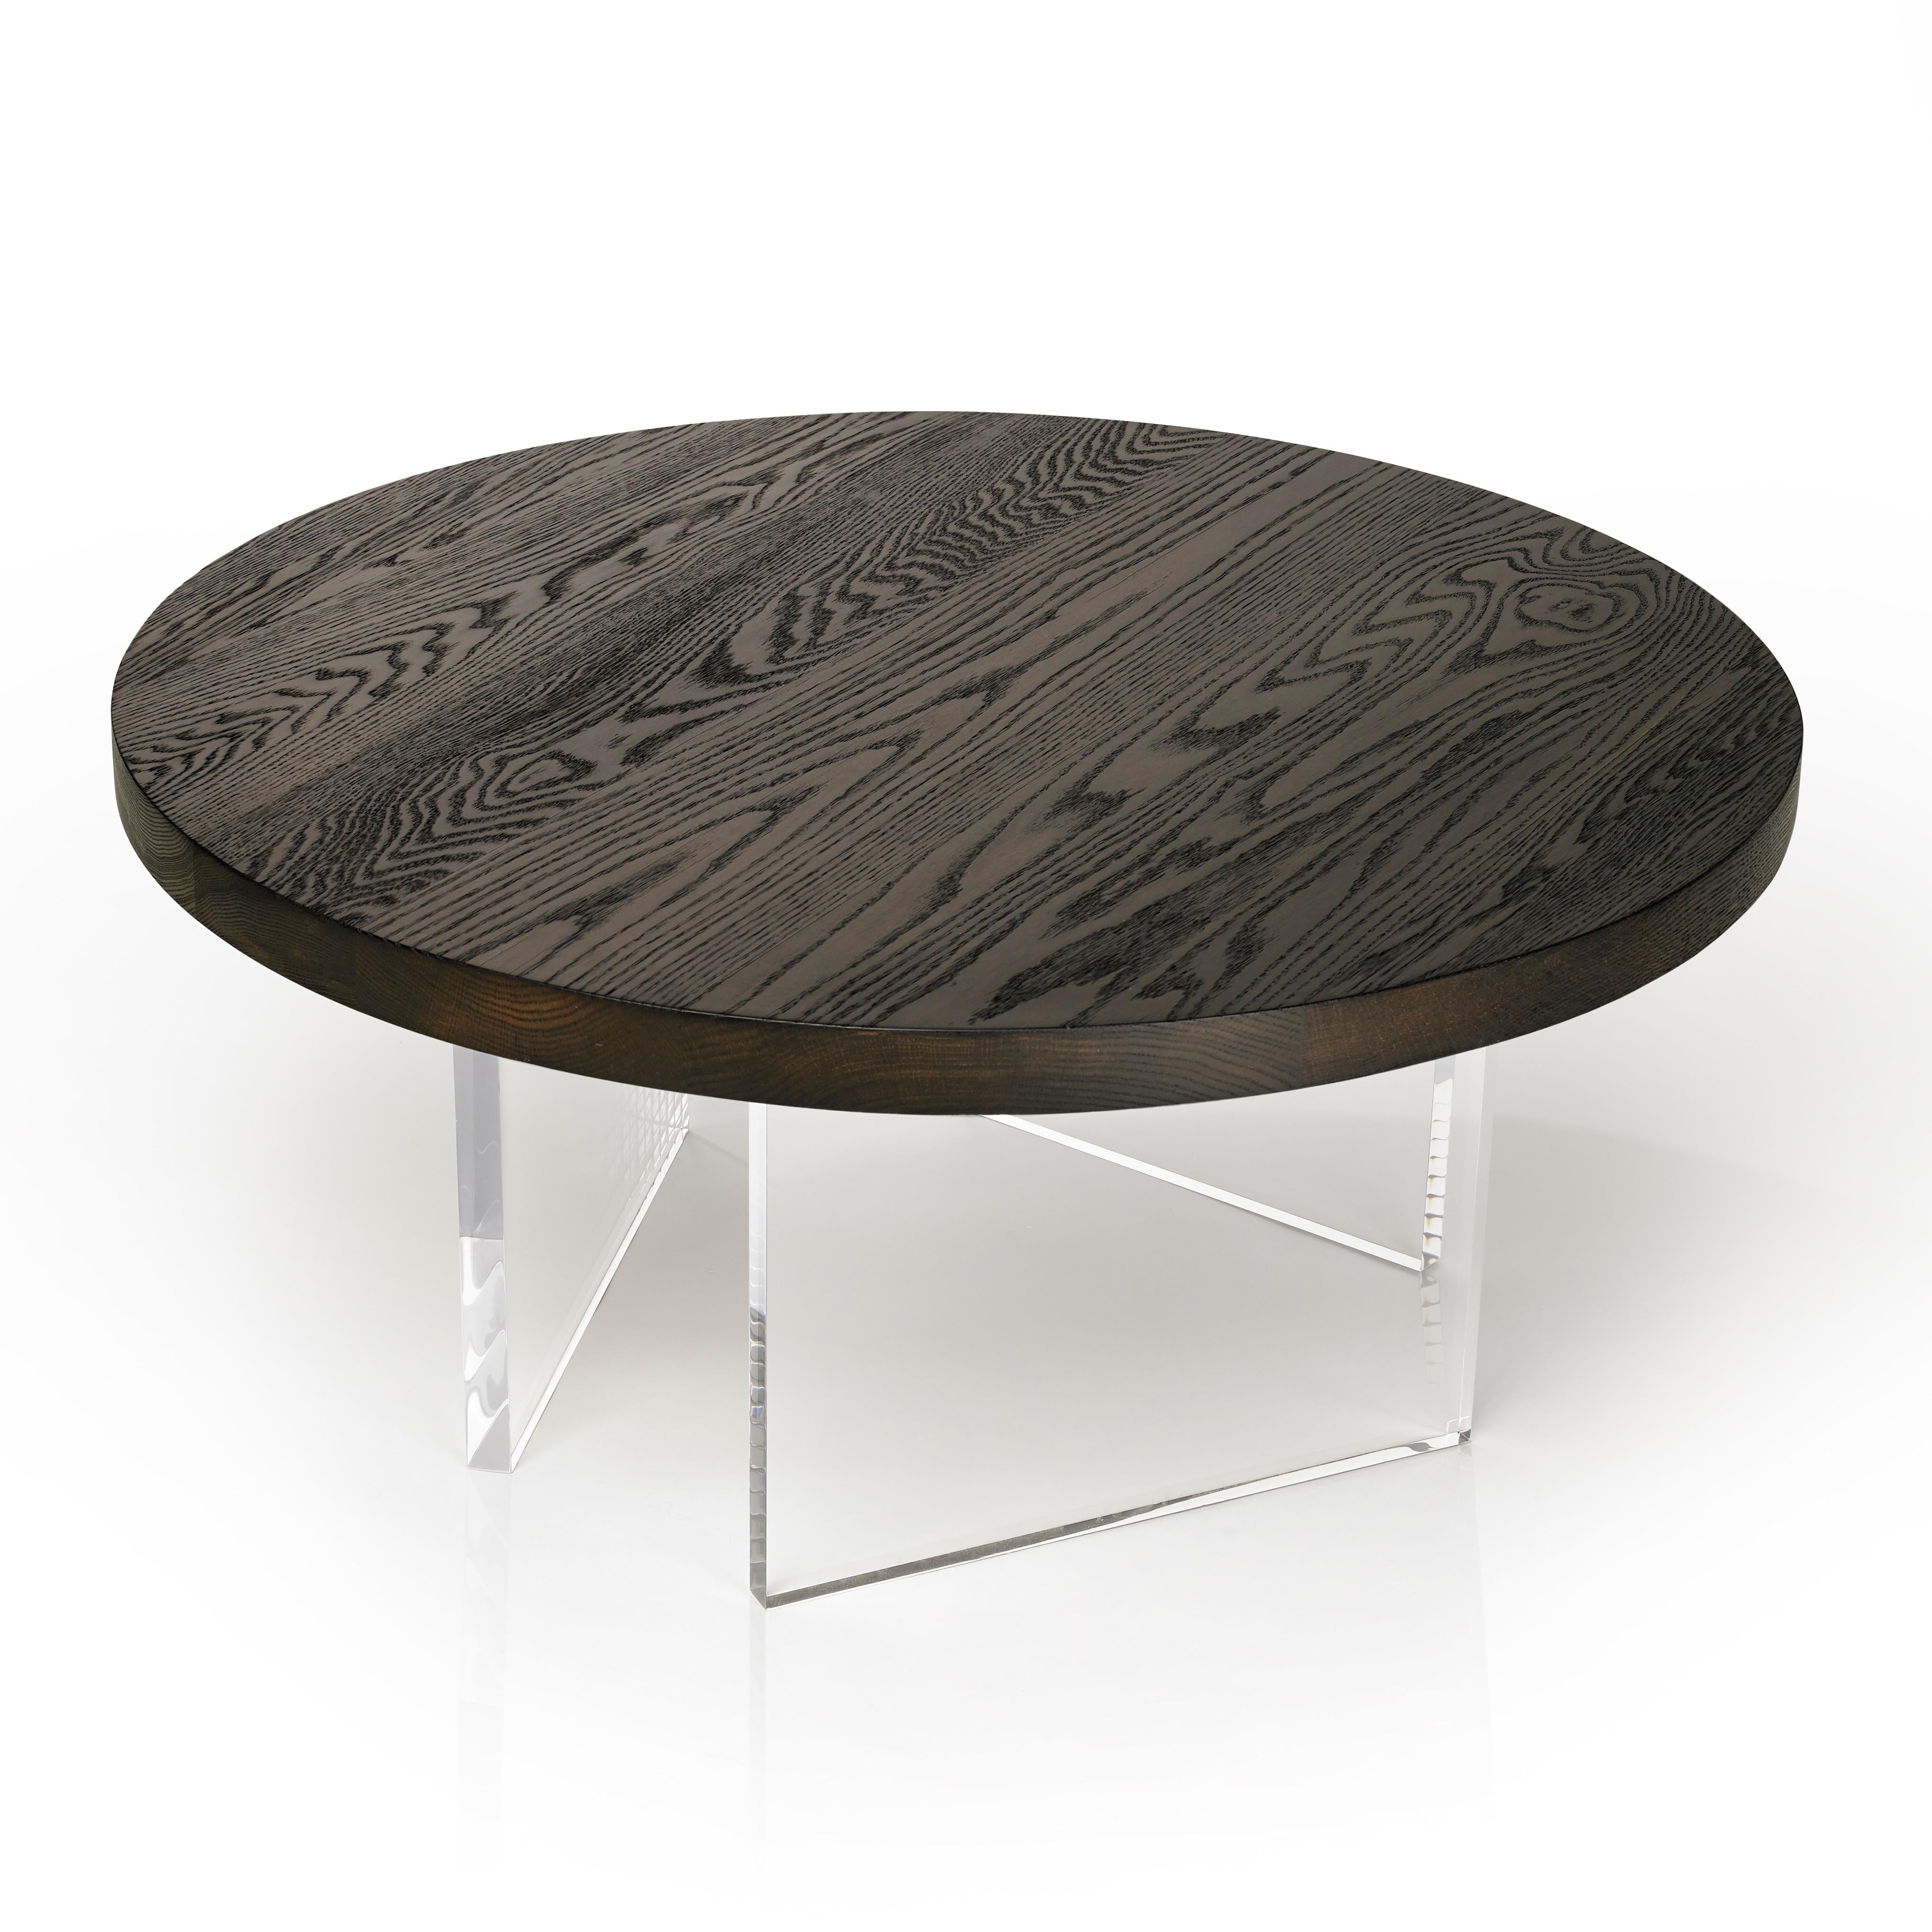 The refined Constantinople Round coffee table in torched oak, using the traditional Japanese shou-sugi-ban technique, provides a sophisticated feel to its space. The tabletop sits on three acrylic one-inch thick legs that allow light to pass through